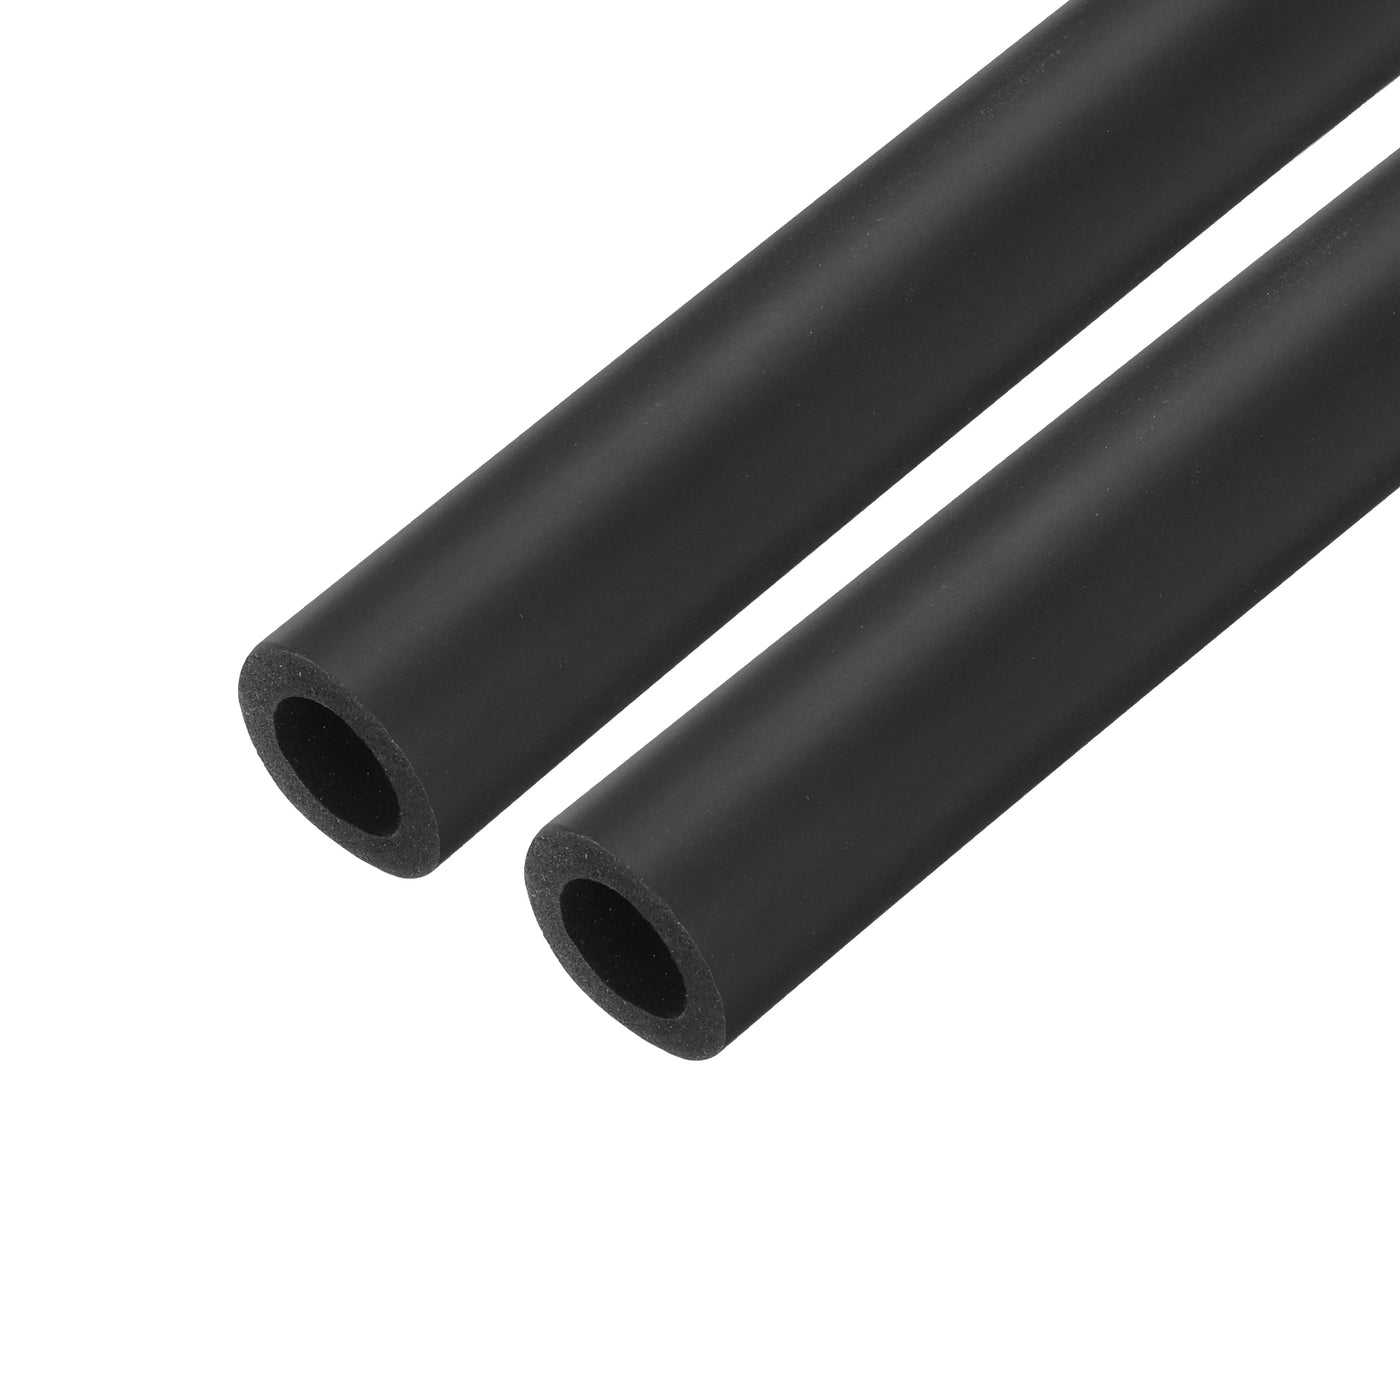 uxcell Uxcell 2pcs 3.3ft Pipe Insulation Tube 18mm ID 30mm OD Foam Tubing for Handle Grip Support, Black